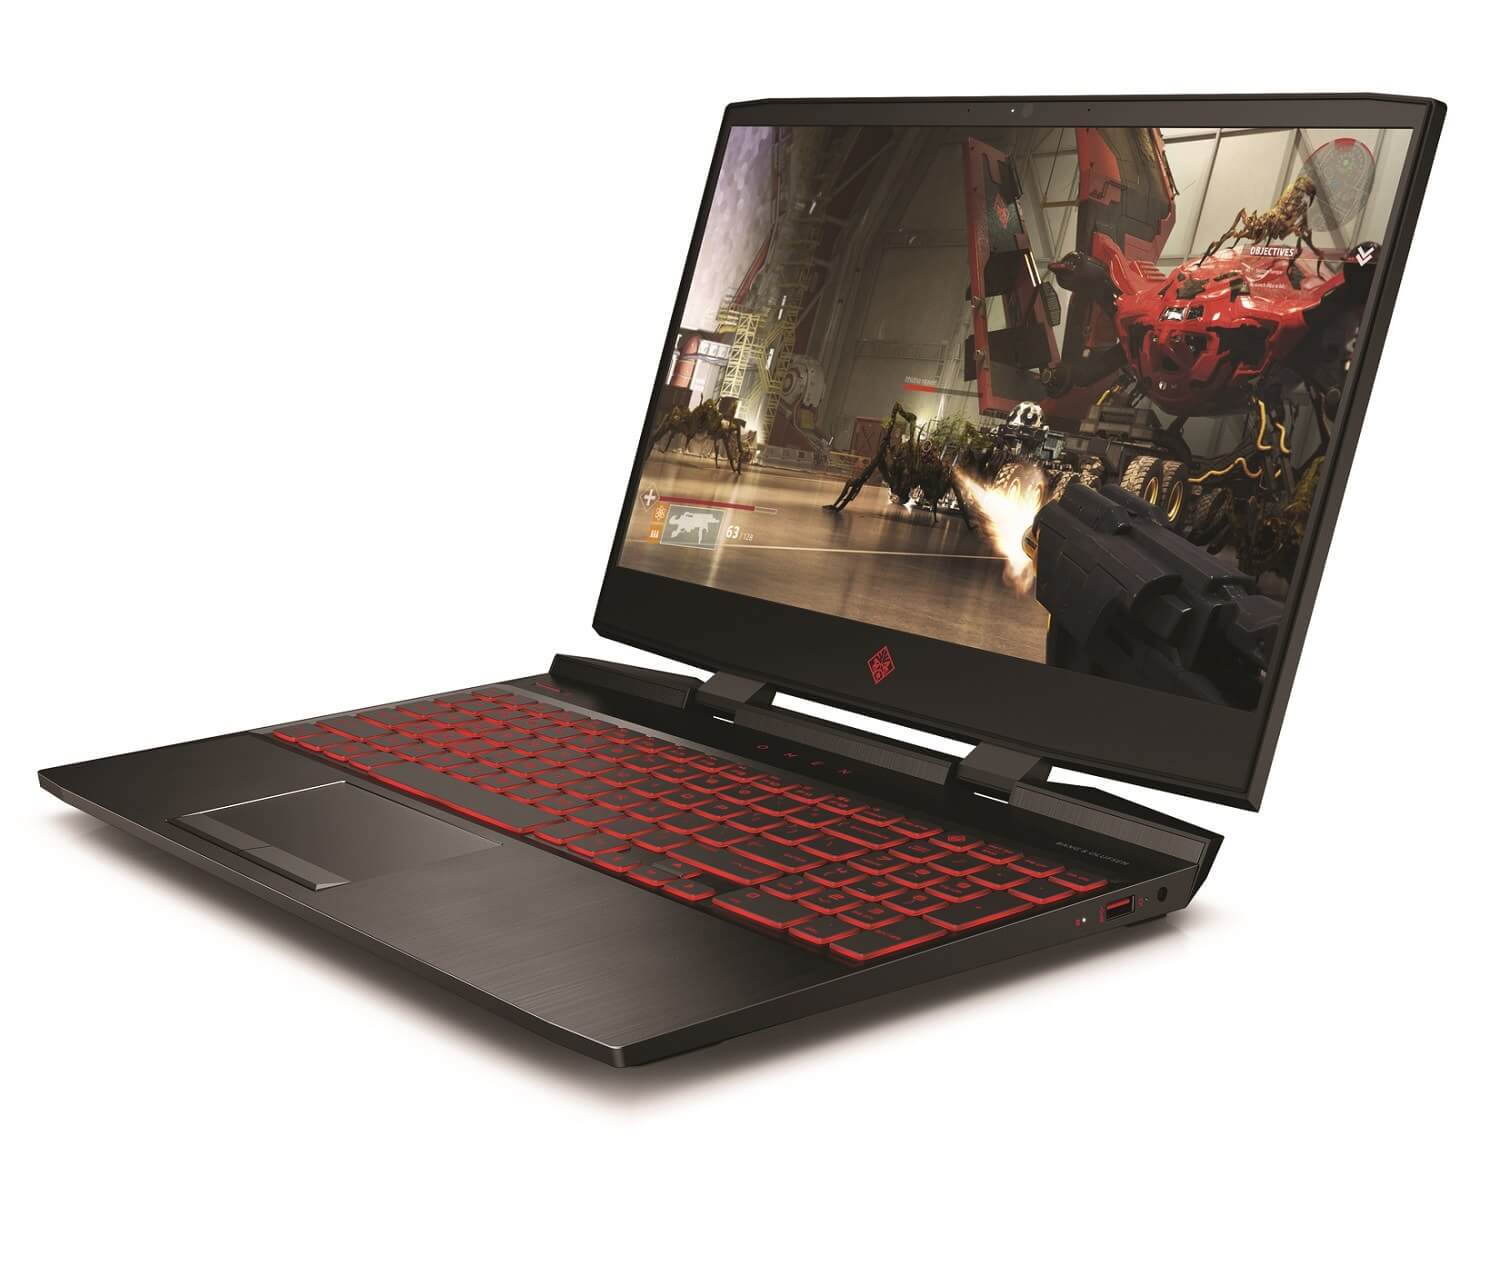 HP announces Omen 15 laptop and gaming headset with ear-cooling technology